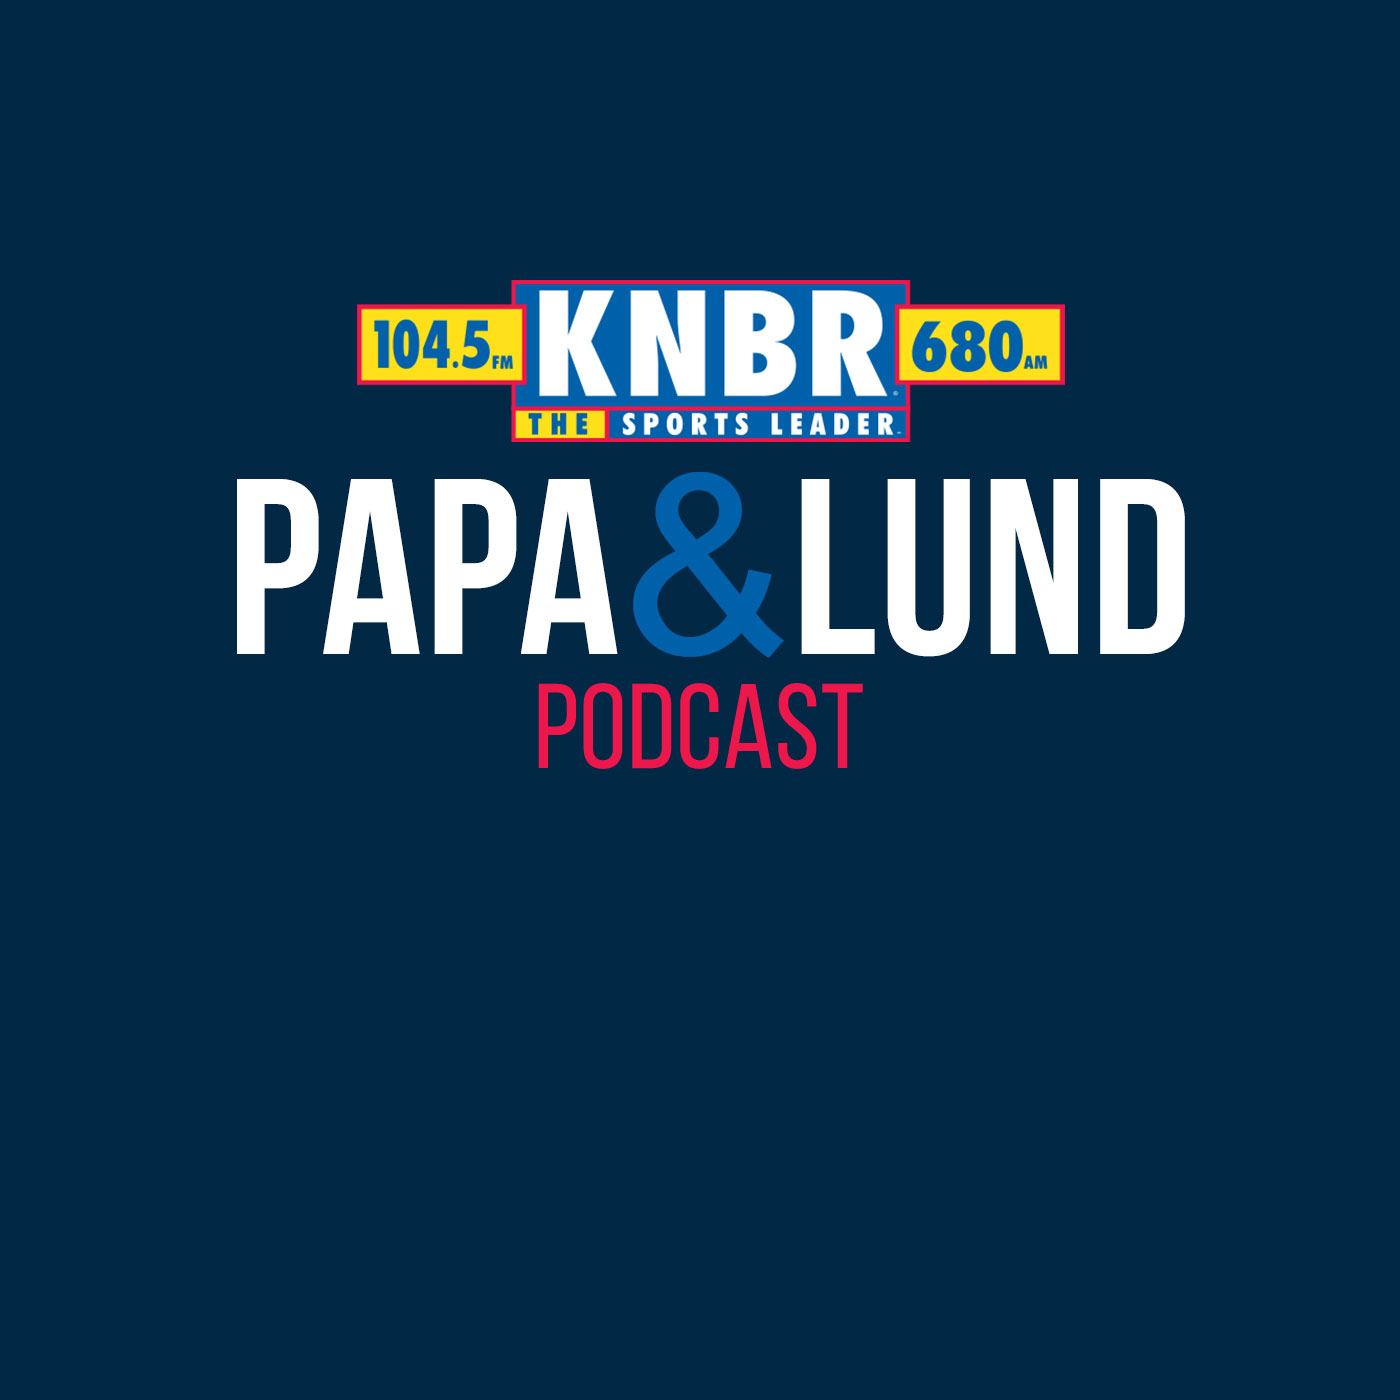 11-7 Ted Nguyen joins Papa & Lund to discuss another wild weekend in the NFL and lists the 3 teams that he has ahead of the 49ers in the NFC